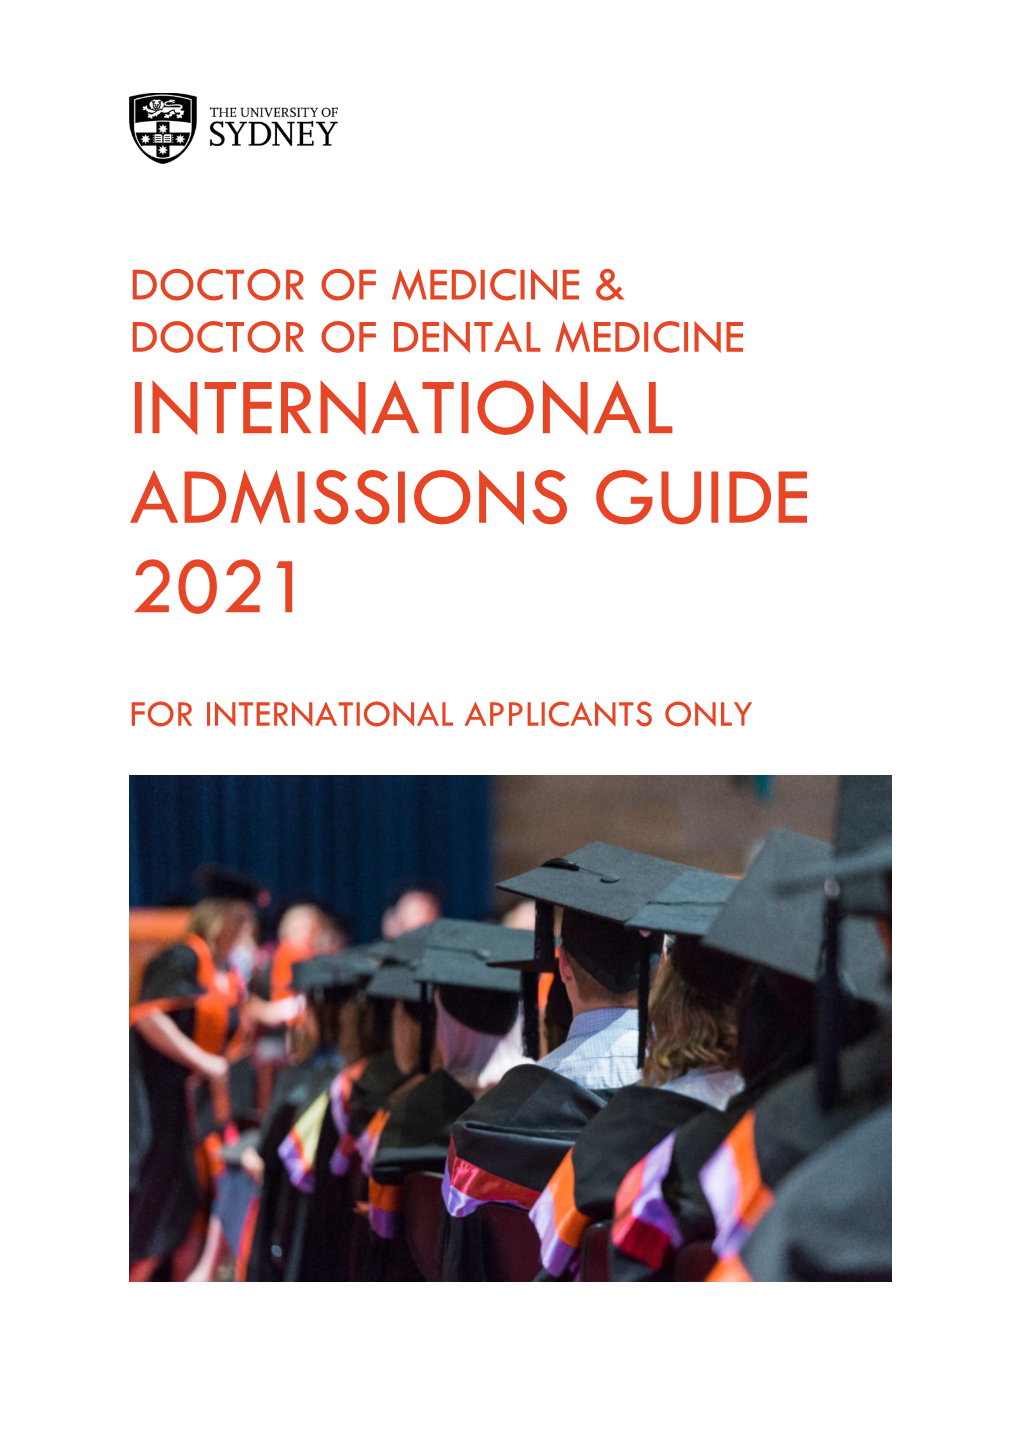 2021 International Admissions Guide